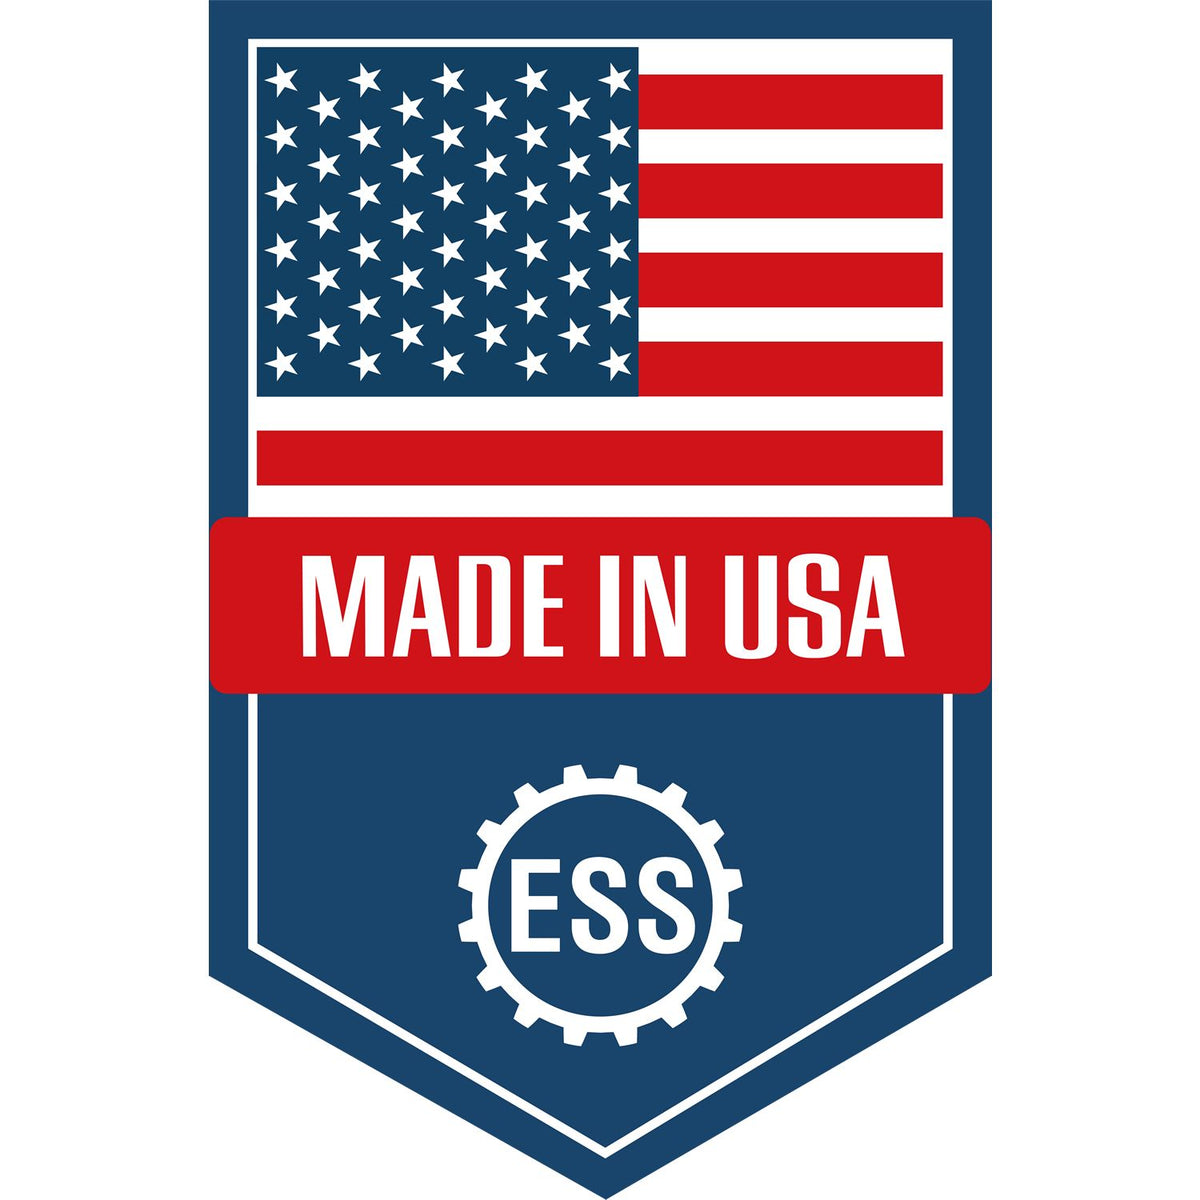 An icon or graphic with an american flag and text reading Made in USA for the Slim Pre-Inked South Carolina Professional Engineer Seal Stamp